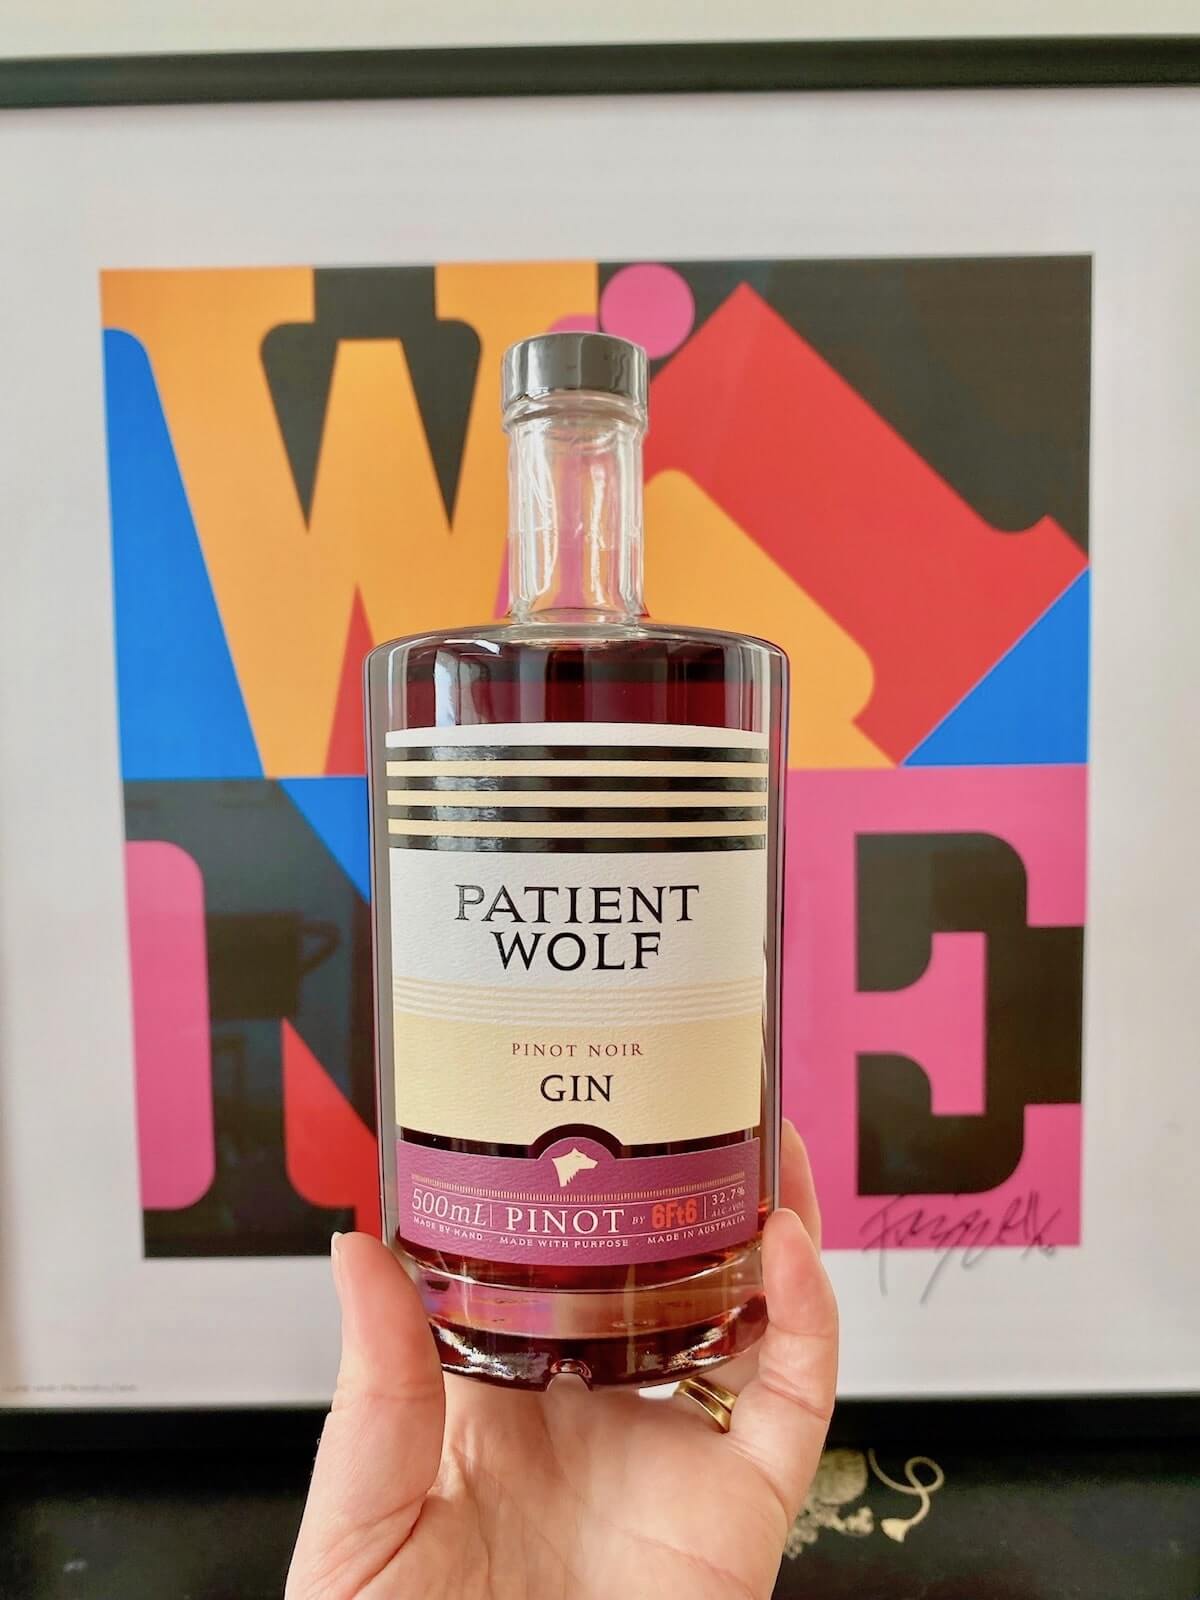 Pinot Noir Gin by 6Ft6 Wines and Patient Wolf